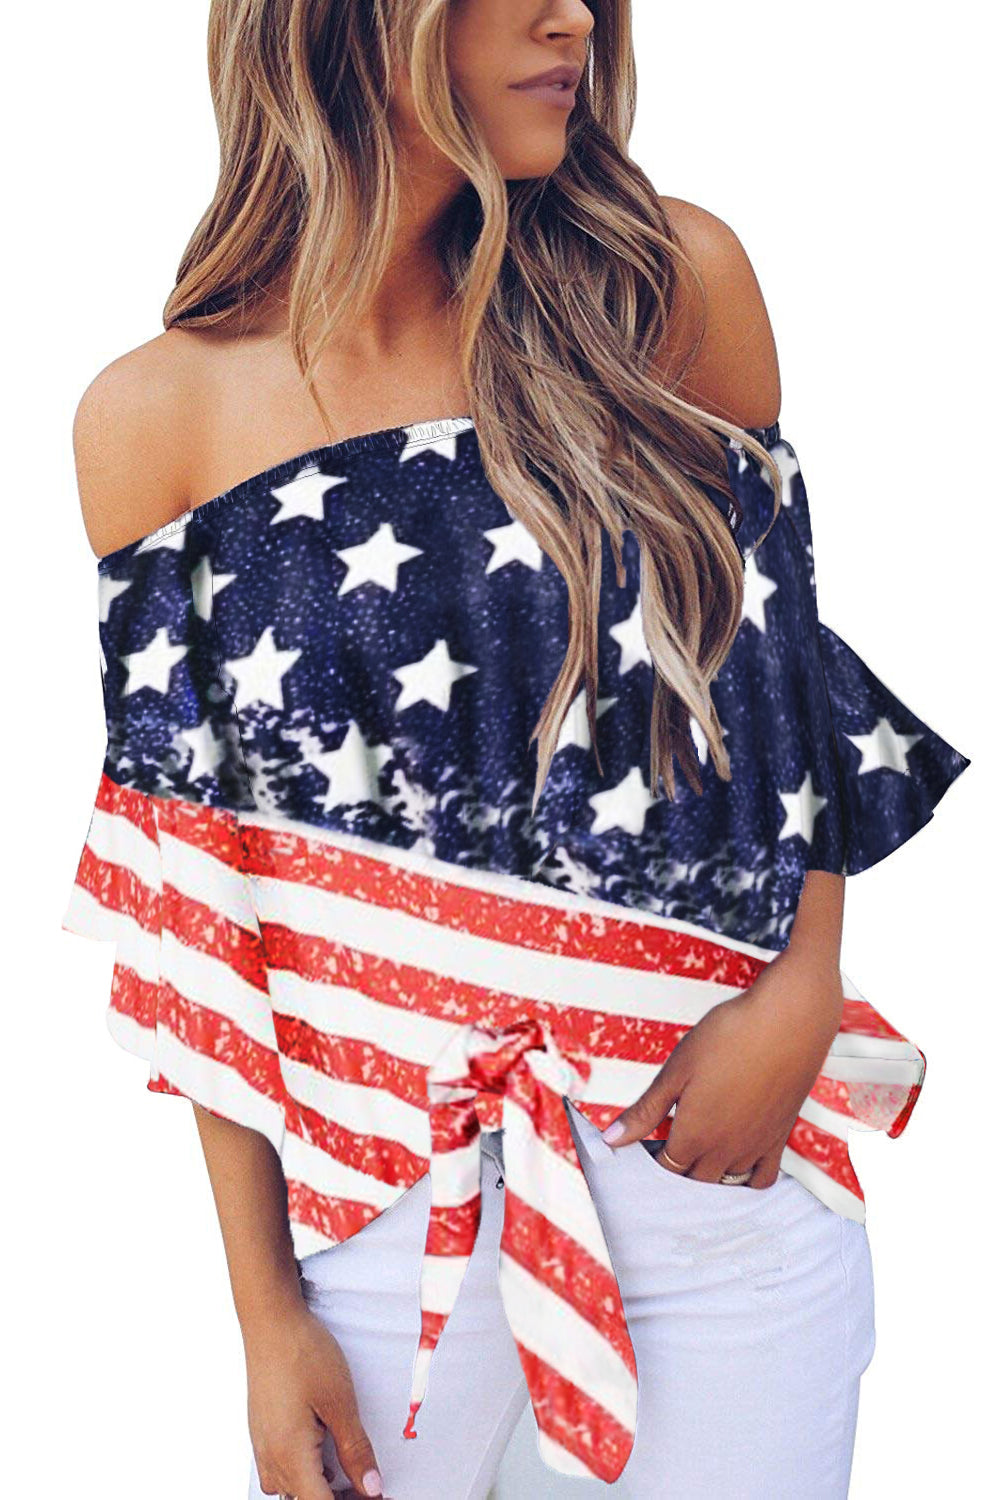 Stars and Stripes Print Off The Shoulder Blouse - Alycia Mikay Fashion 